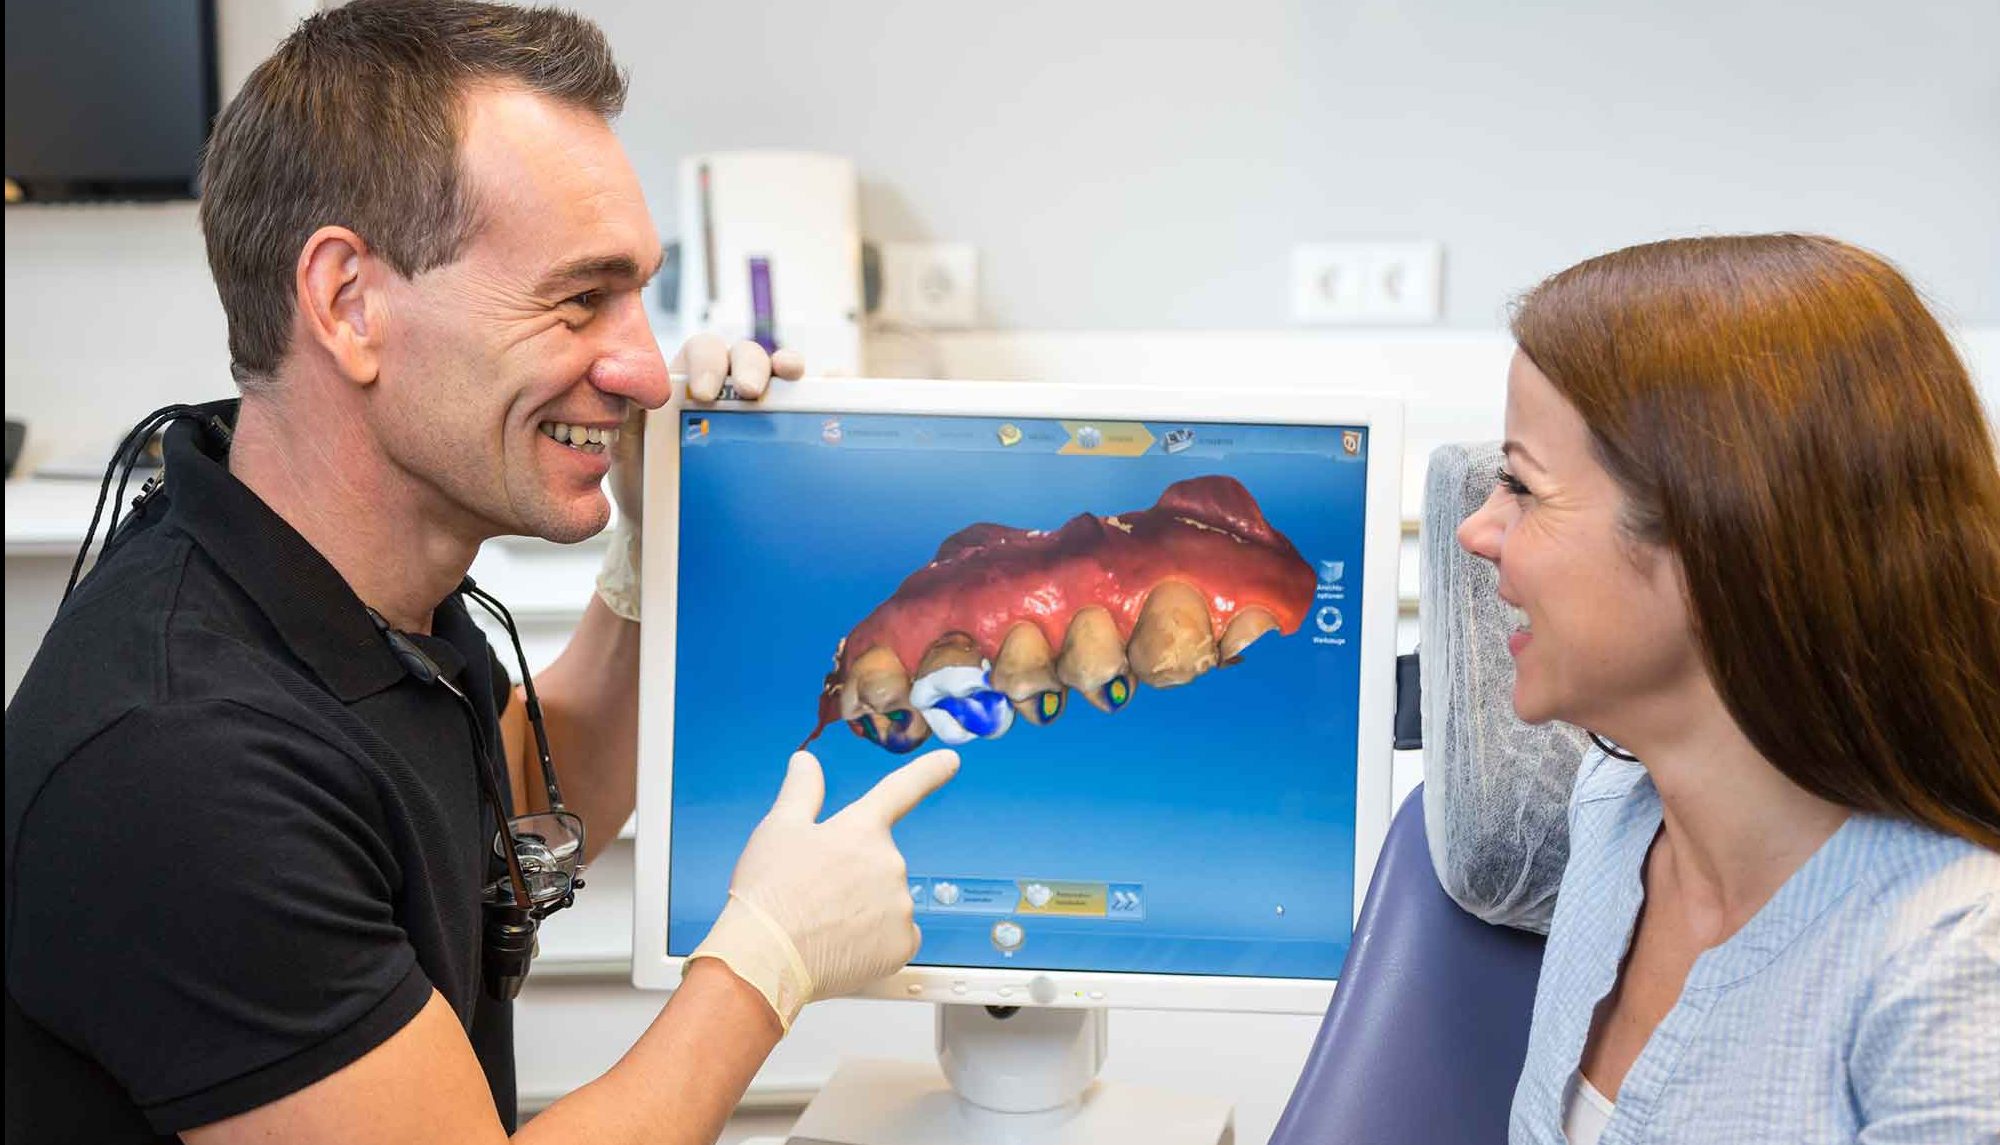 Showing your patient dental imaging could help improve treatment uptake